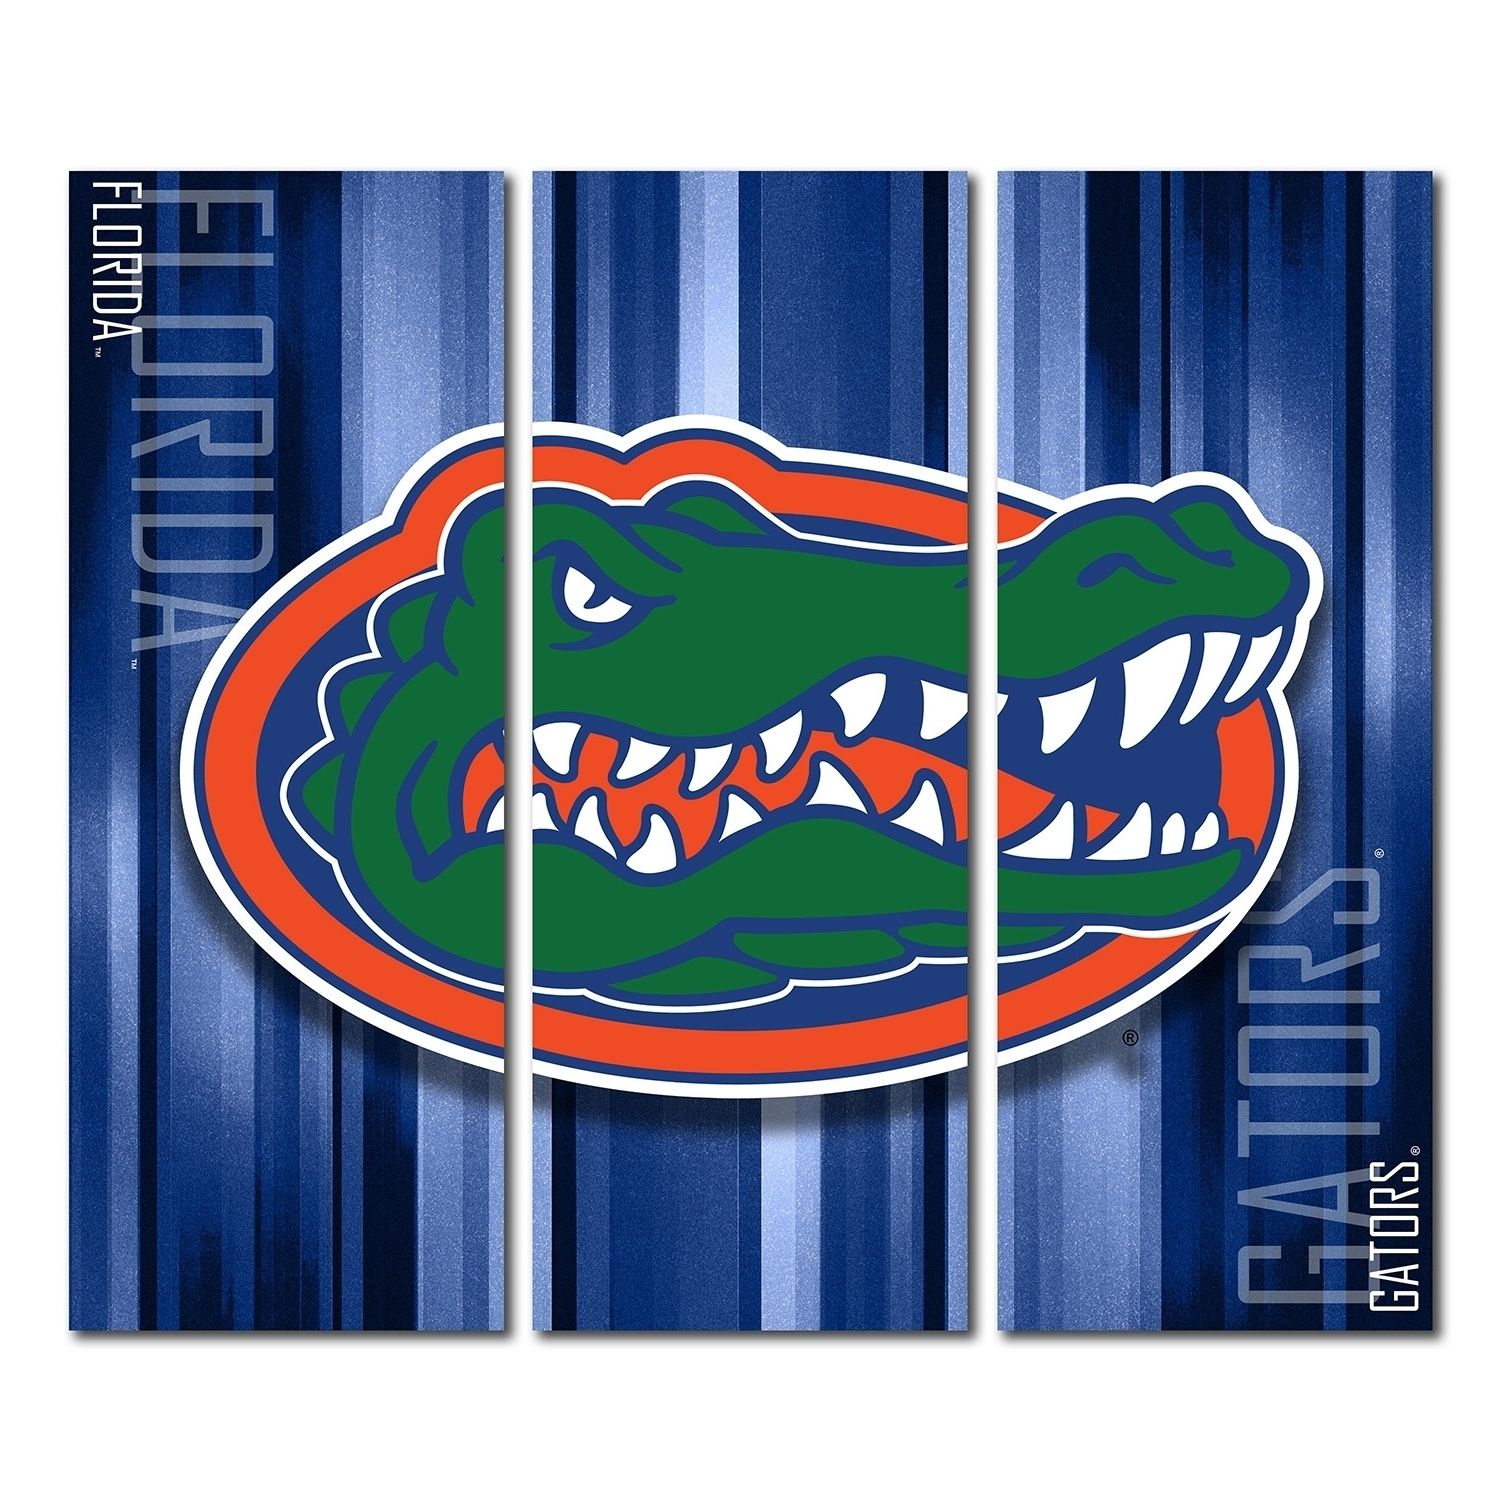 Florida Wall Art Inside Widely Used Image Gallery Of Florida Gator Wall Art View 3 15 Photos Stunning (View 11 of 15)